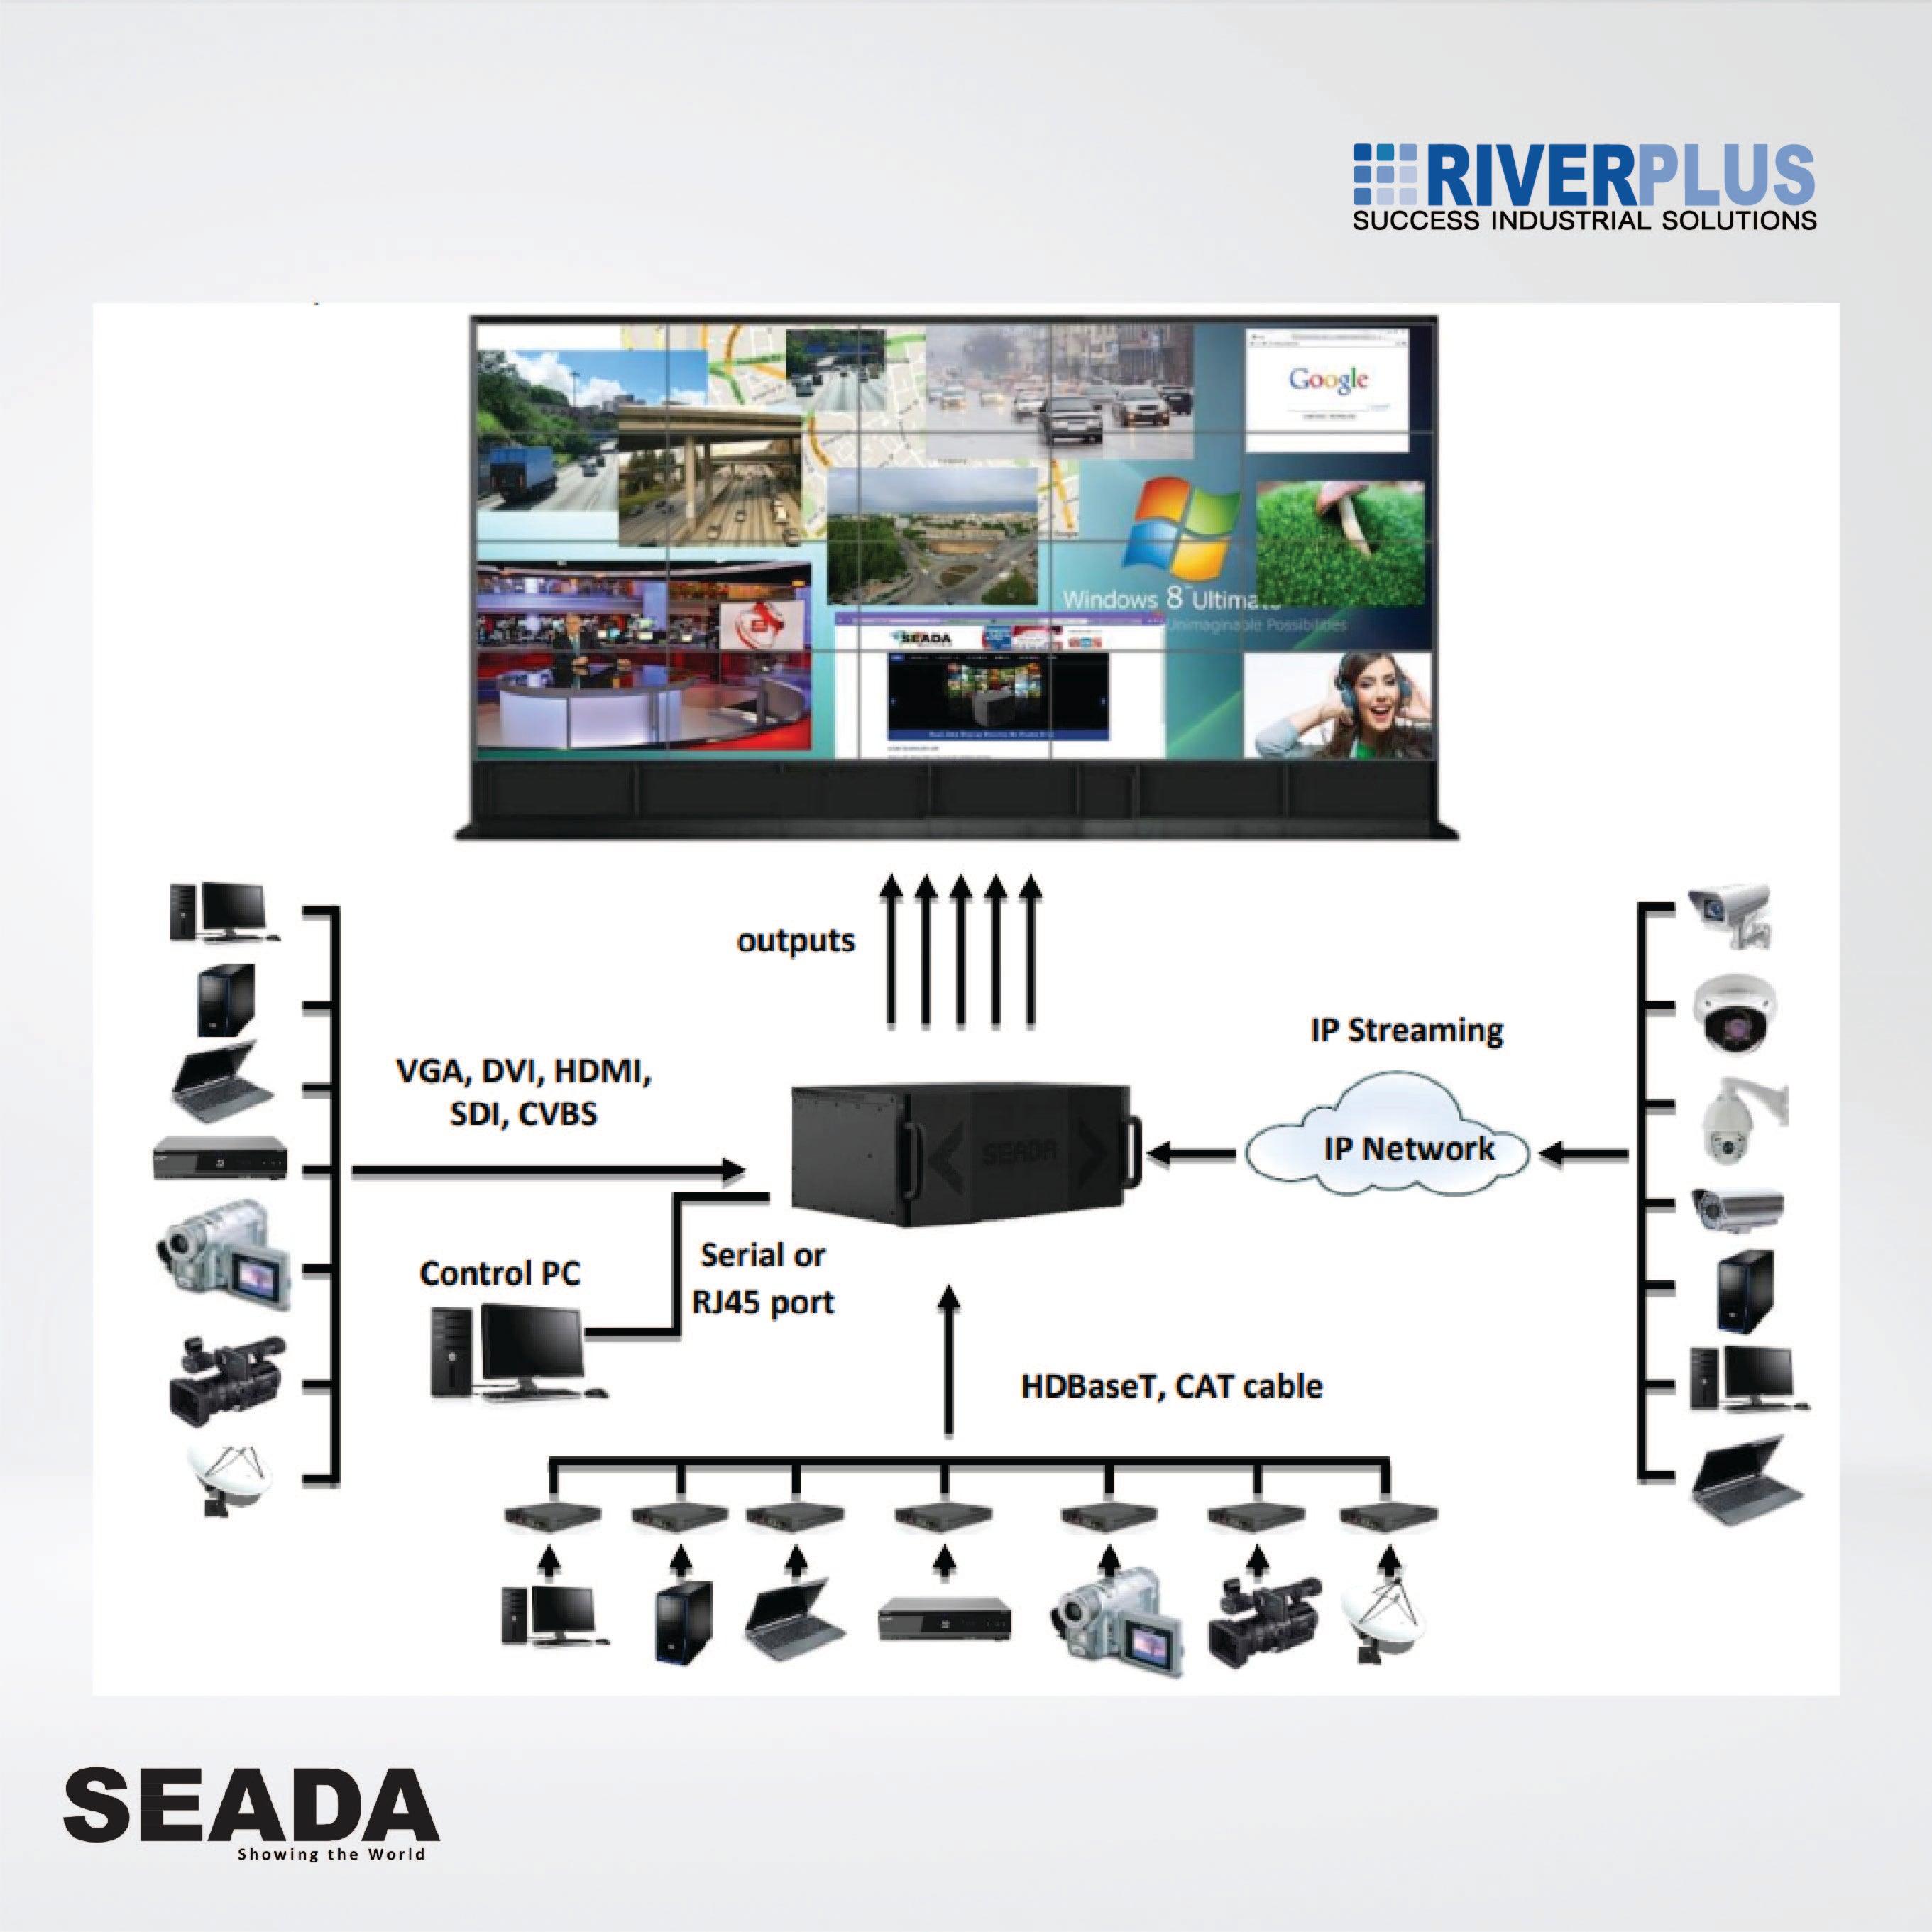 SWP04 CHASSIS 4U, 32 INPUT/20 OUTPUT ,Video wall controllers are the most Advanced solution - Riverplus